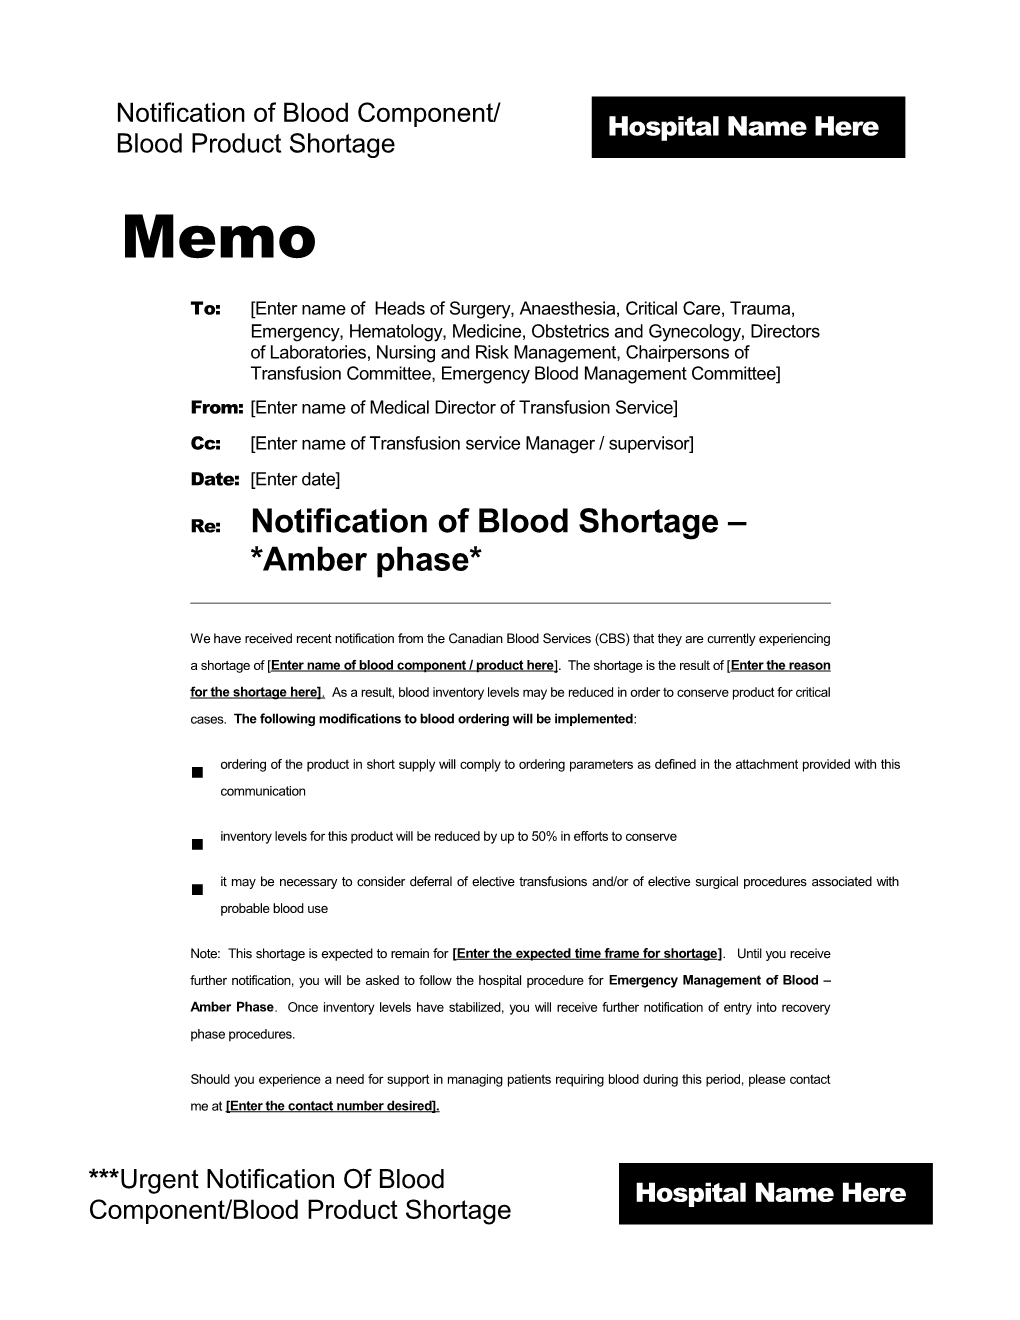 Notification of Blood Component/ Blood Product Shortage